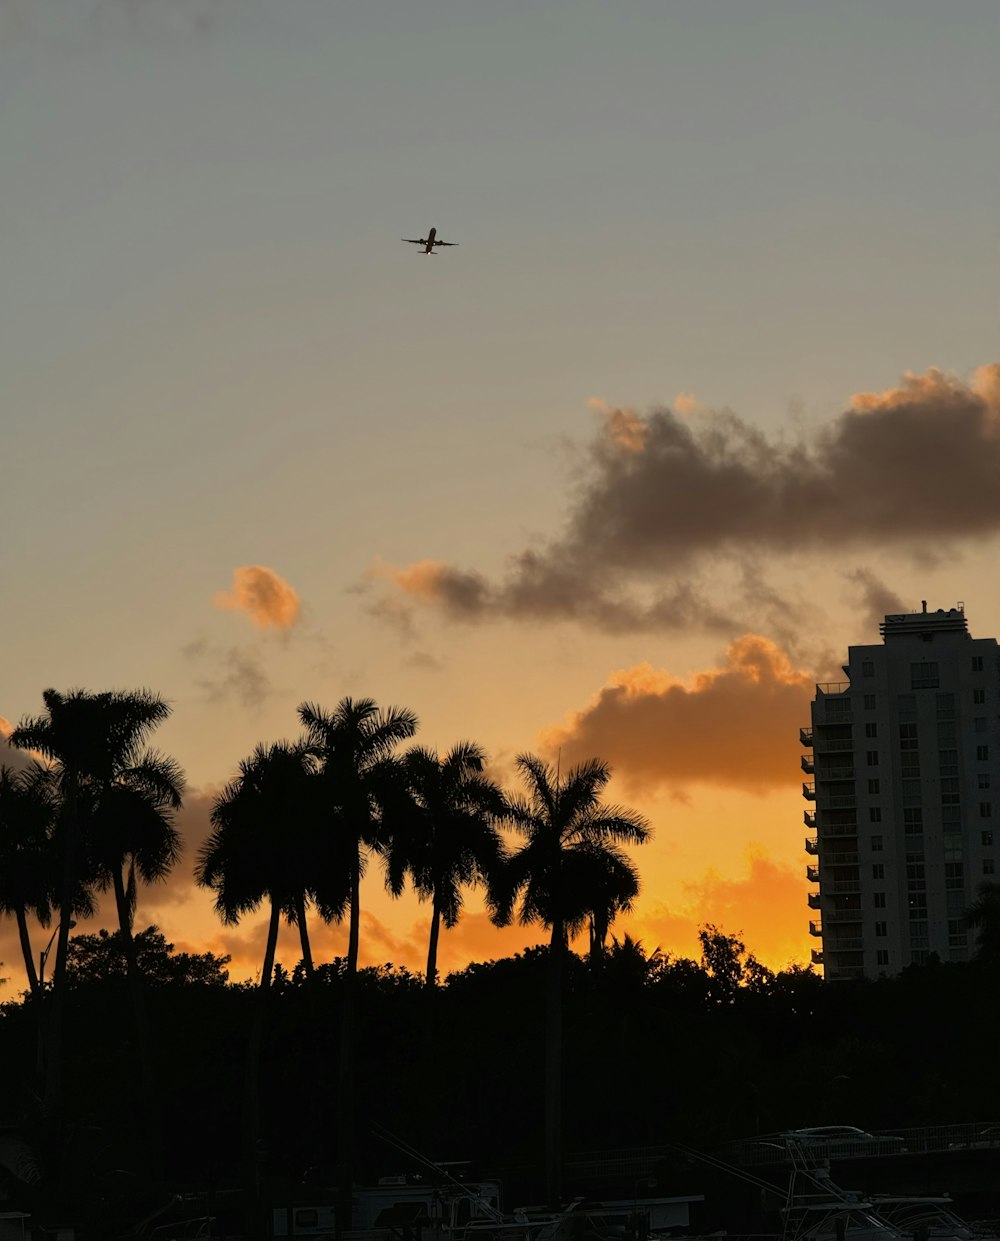 a plane flying in the sky with palm trees in the foreground